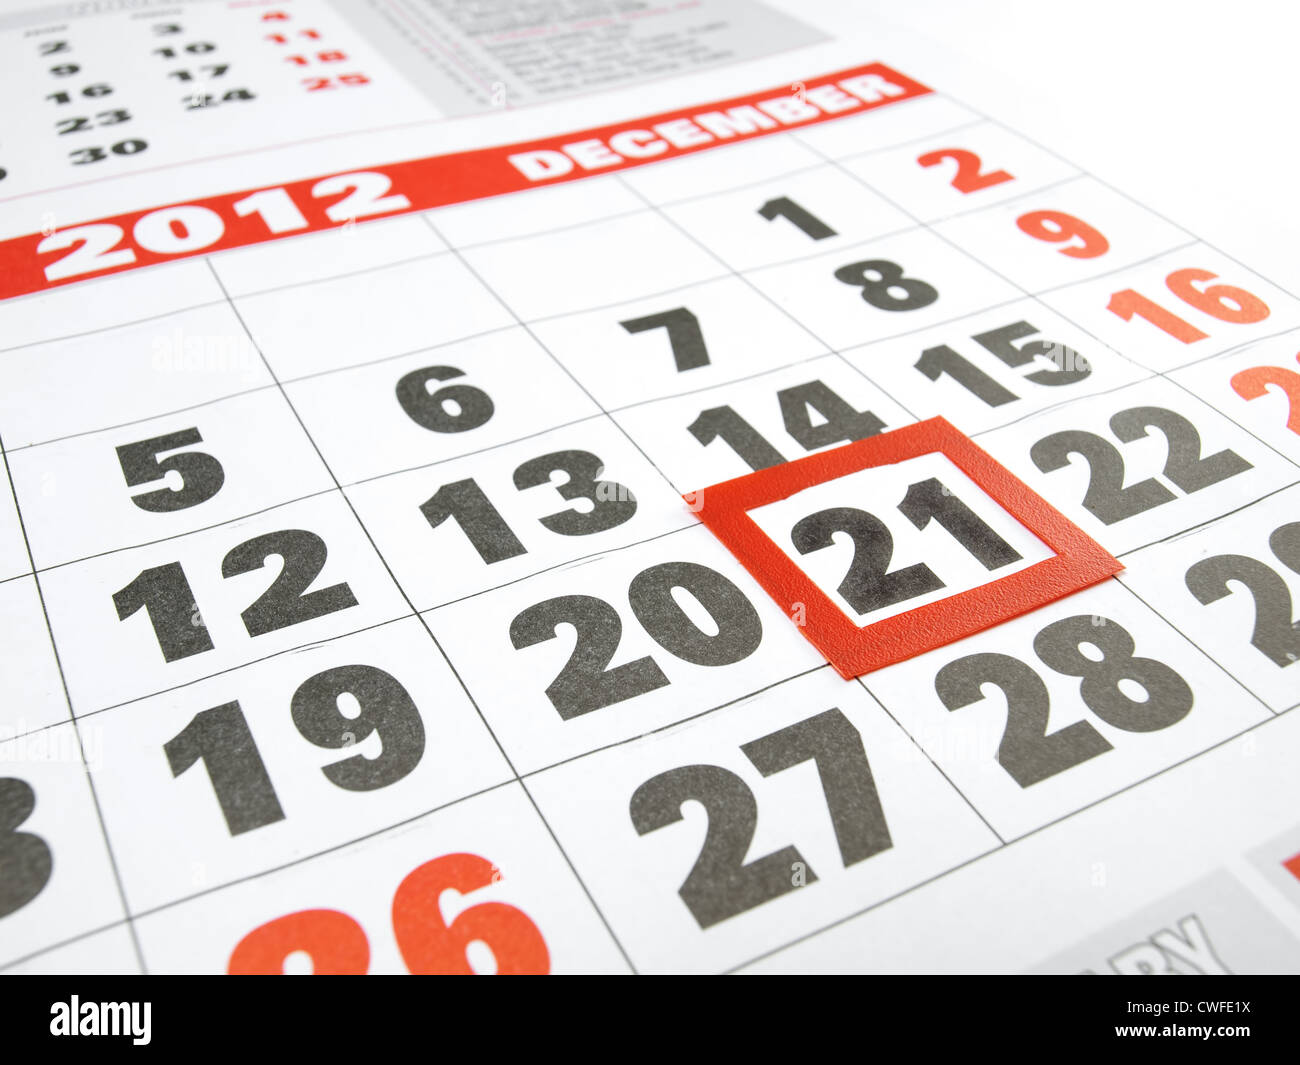 Calendar with the framed date of Judgment Day according to Mayan calendar. Stock Photo